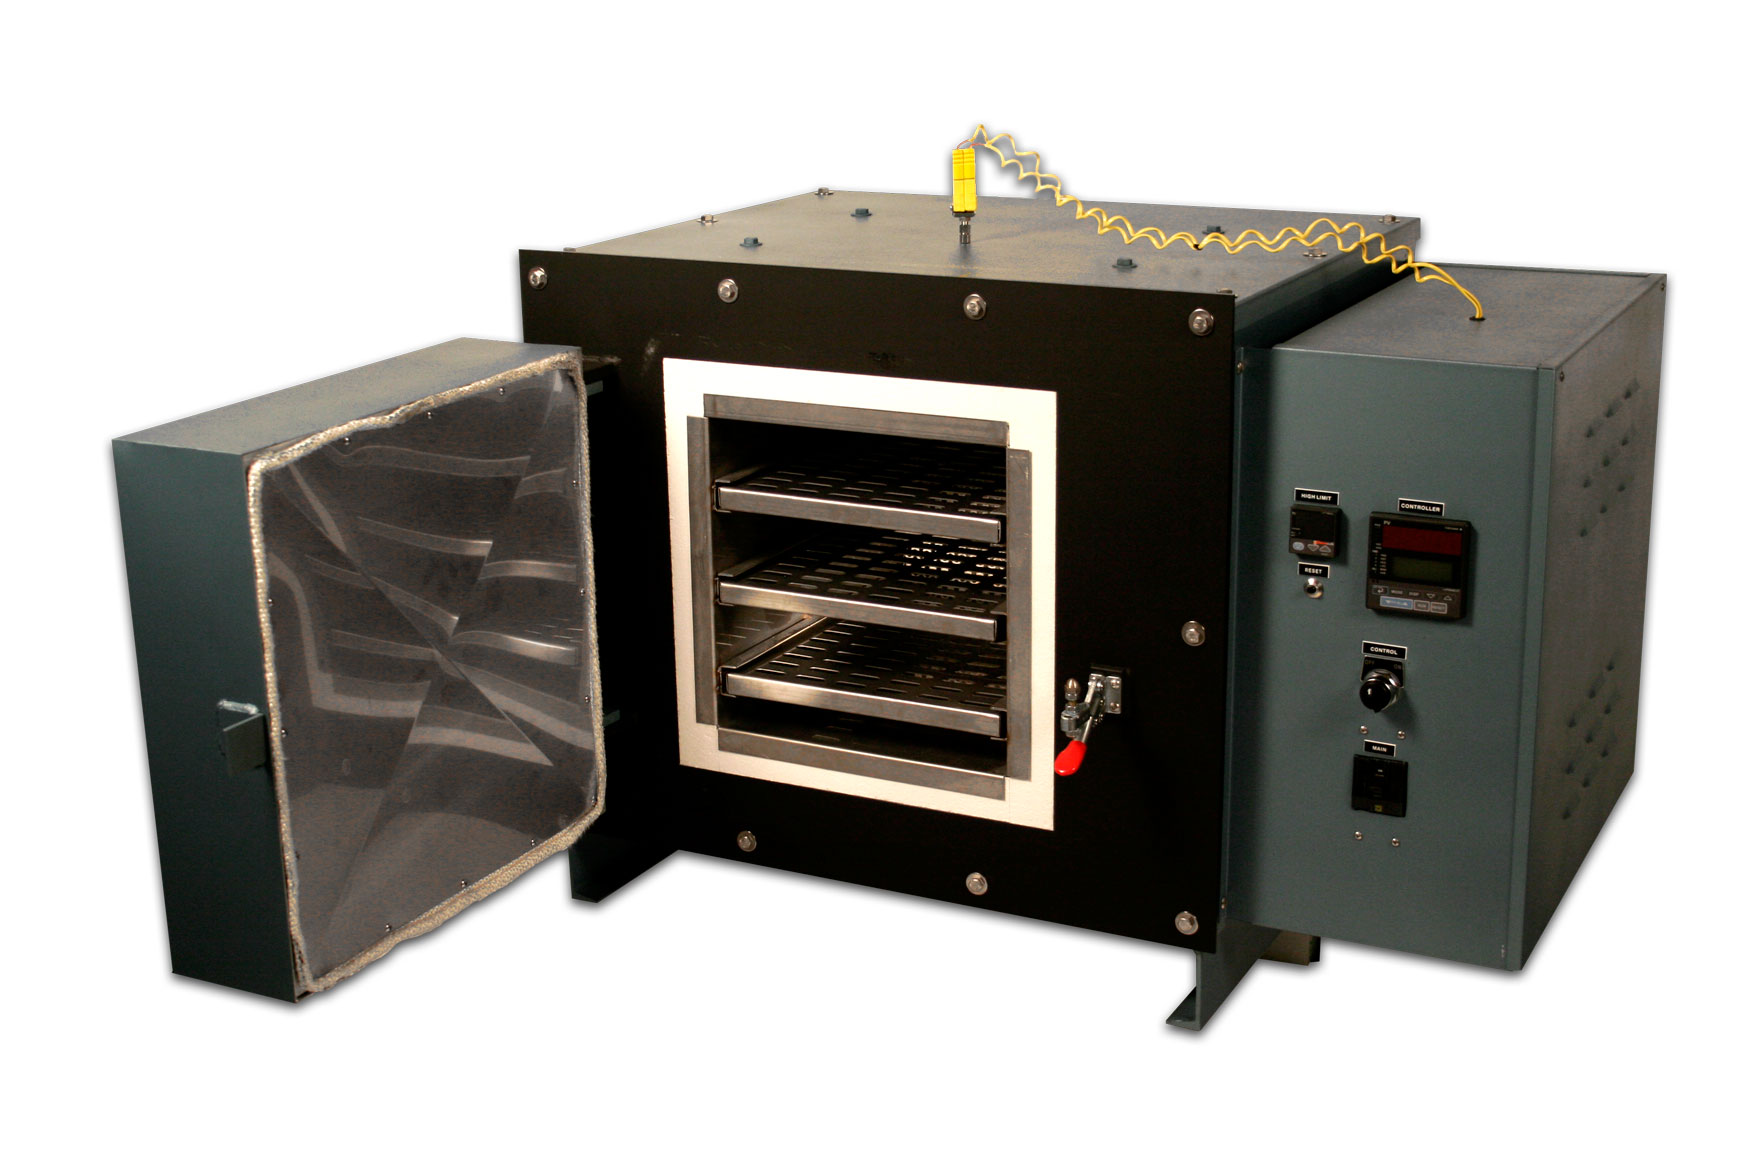 thermcraft-tabletop-oven.jpg